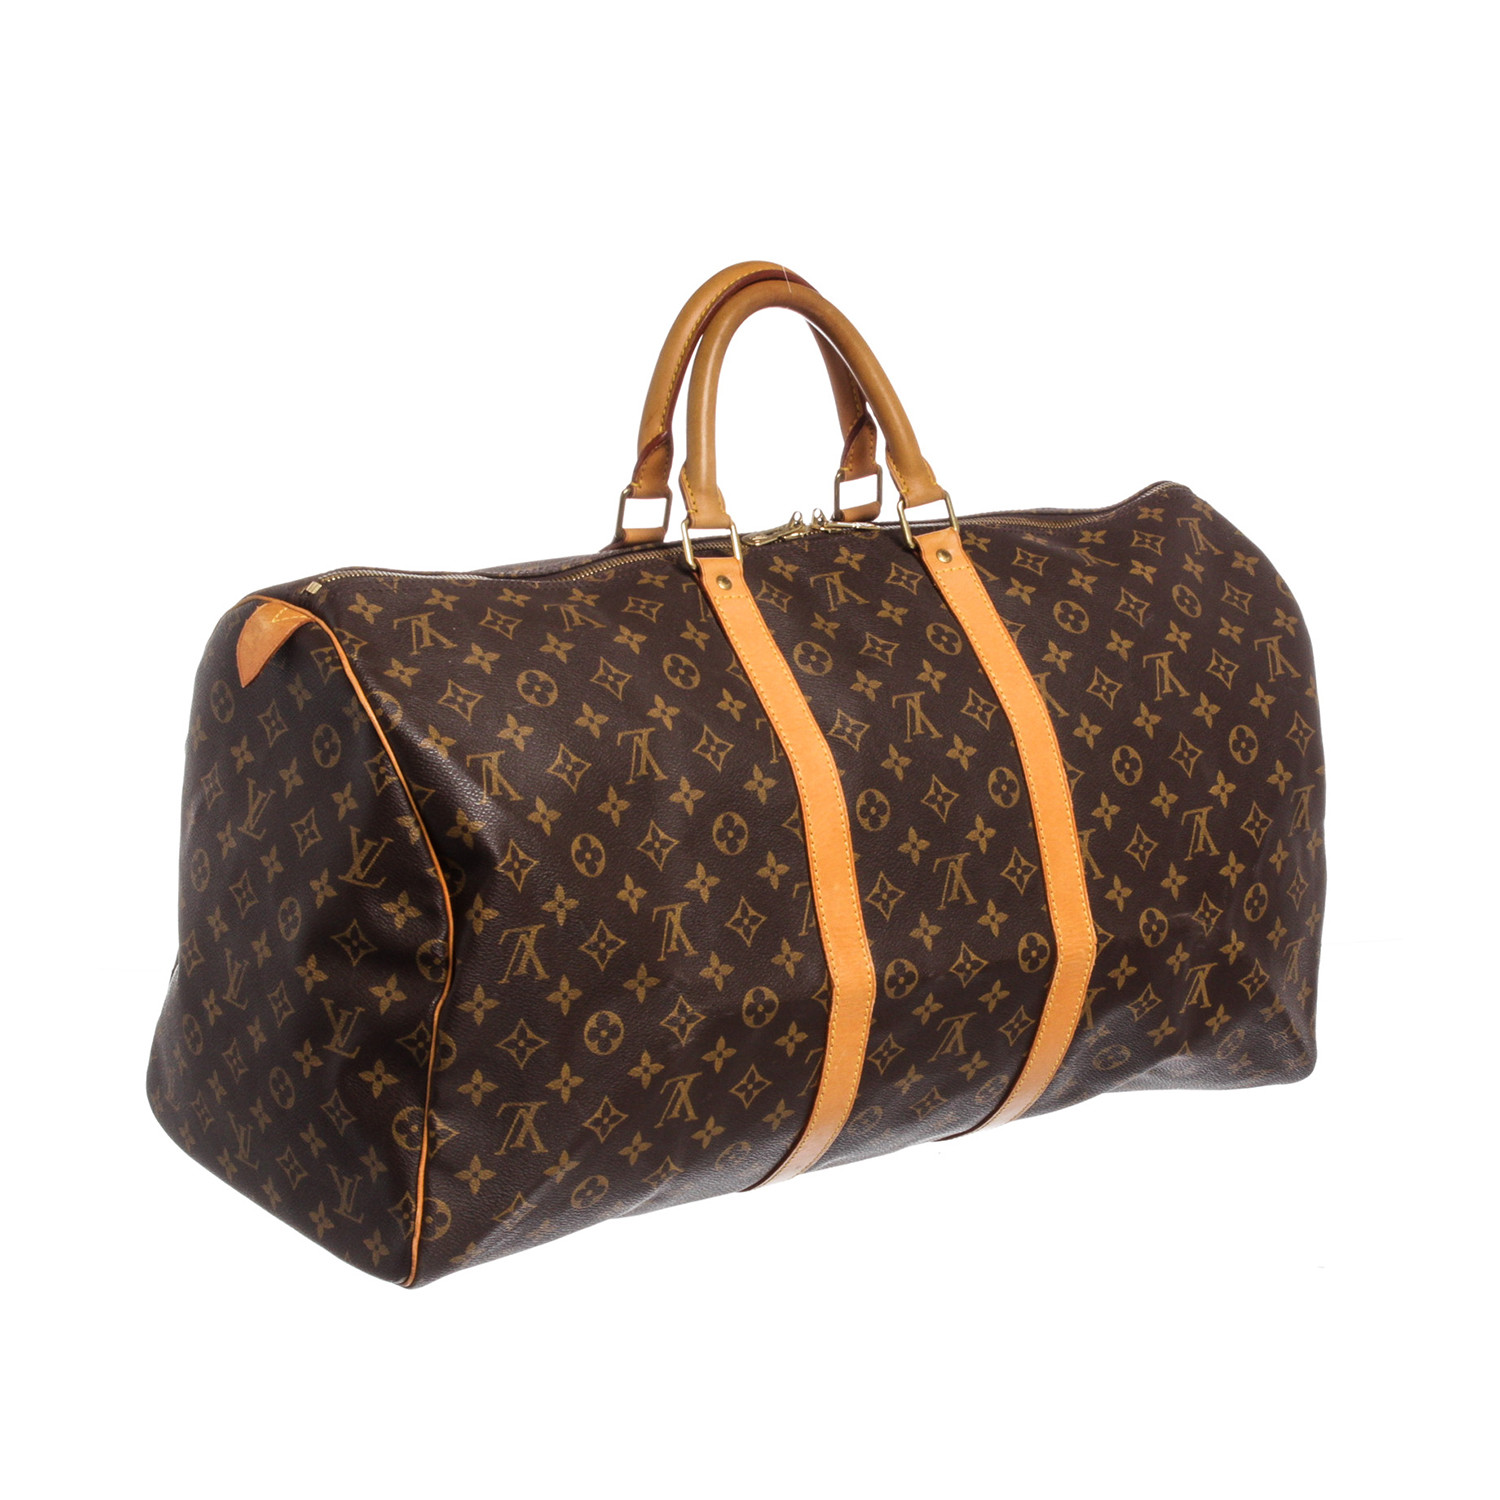 Louis Vuitton // Monogram Canvas Leather Keepall 55 cm Duffle Bag Luggage // SP1926 // Pre-Owned ...